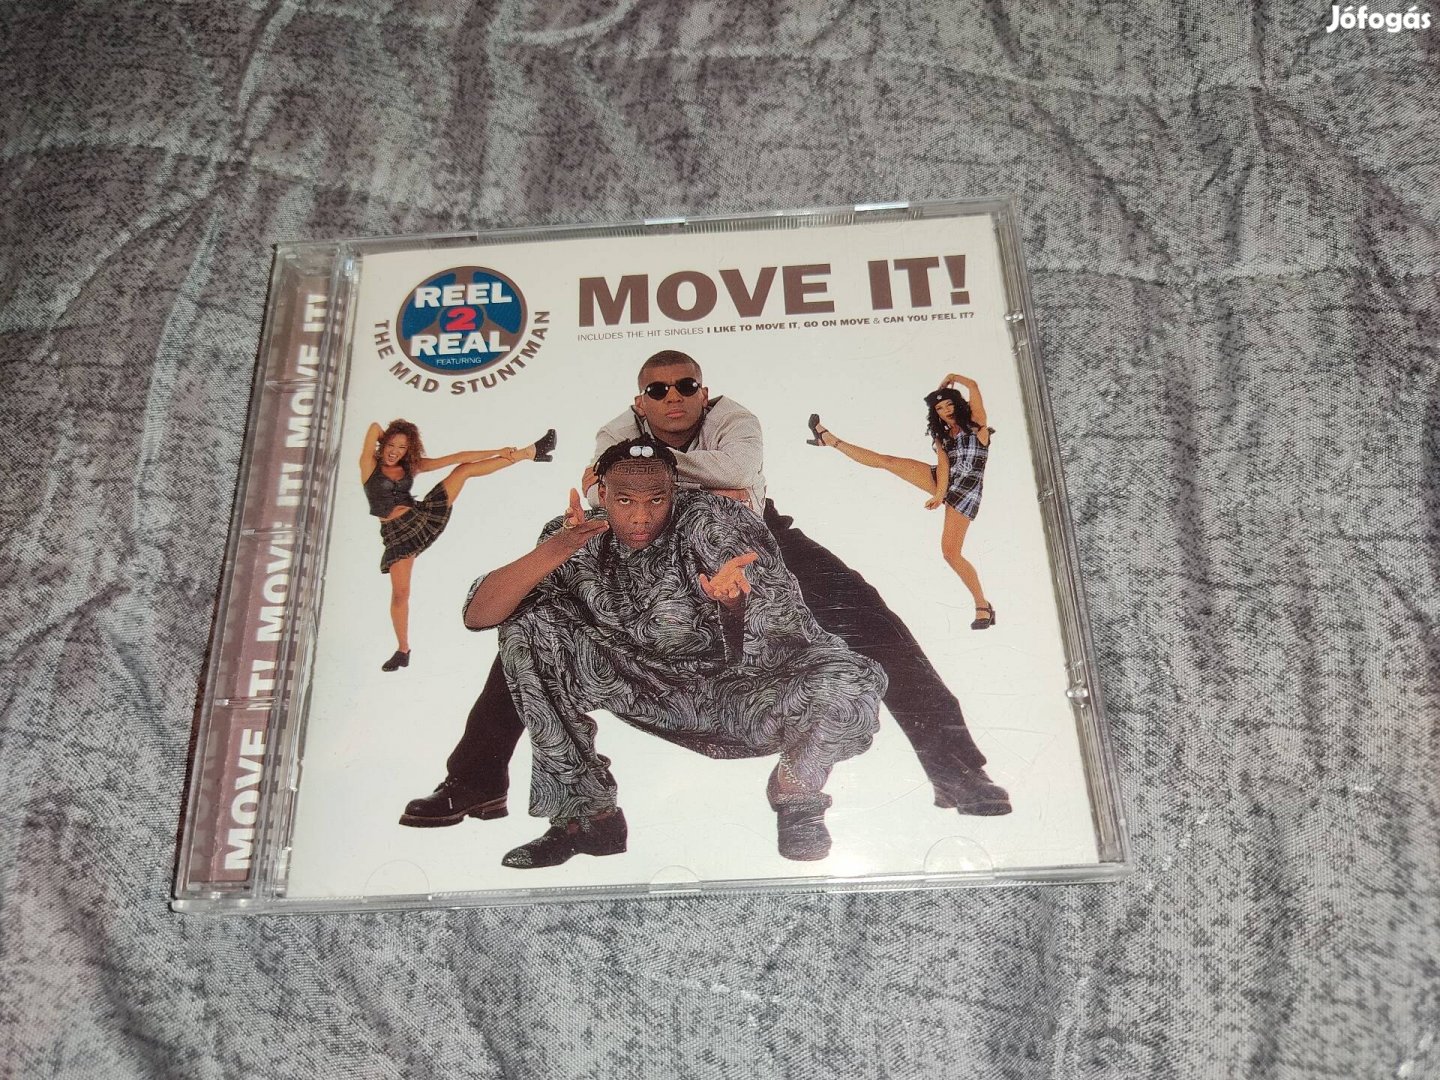 Reel 2 Real - Move It! CD (1994)